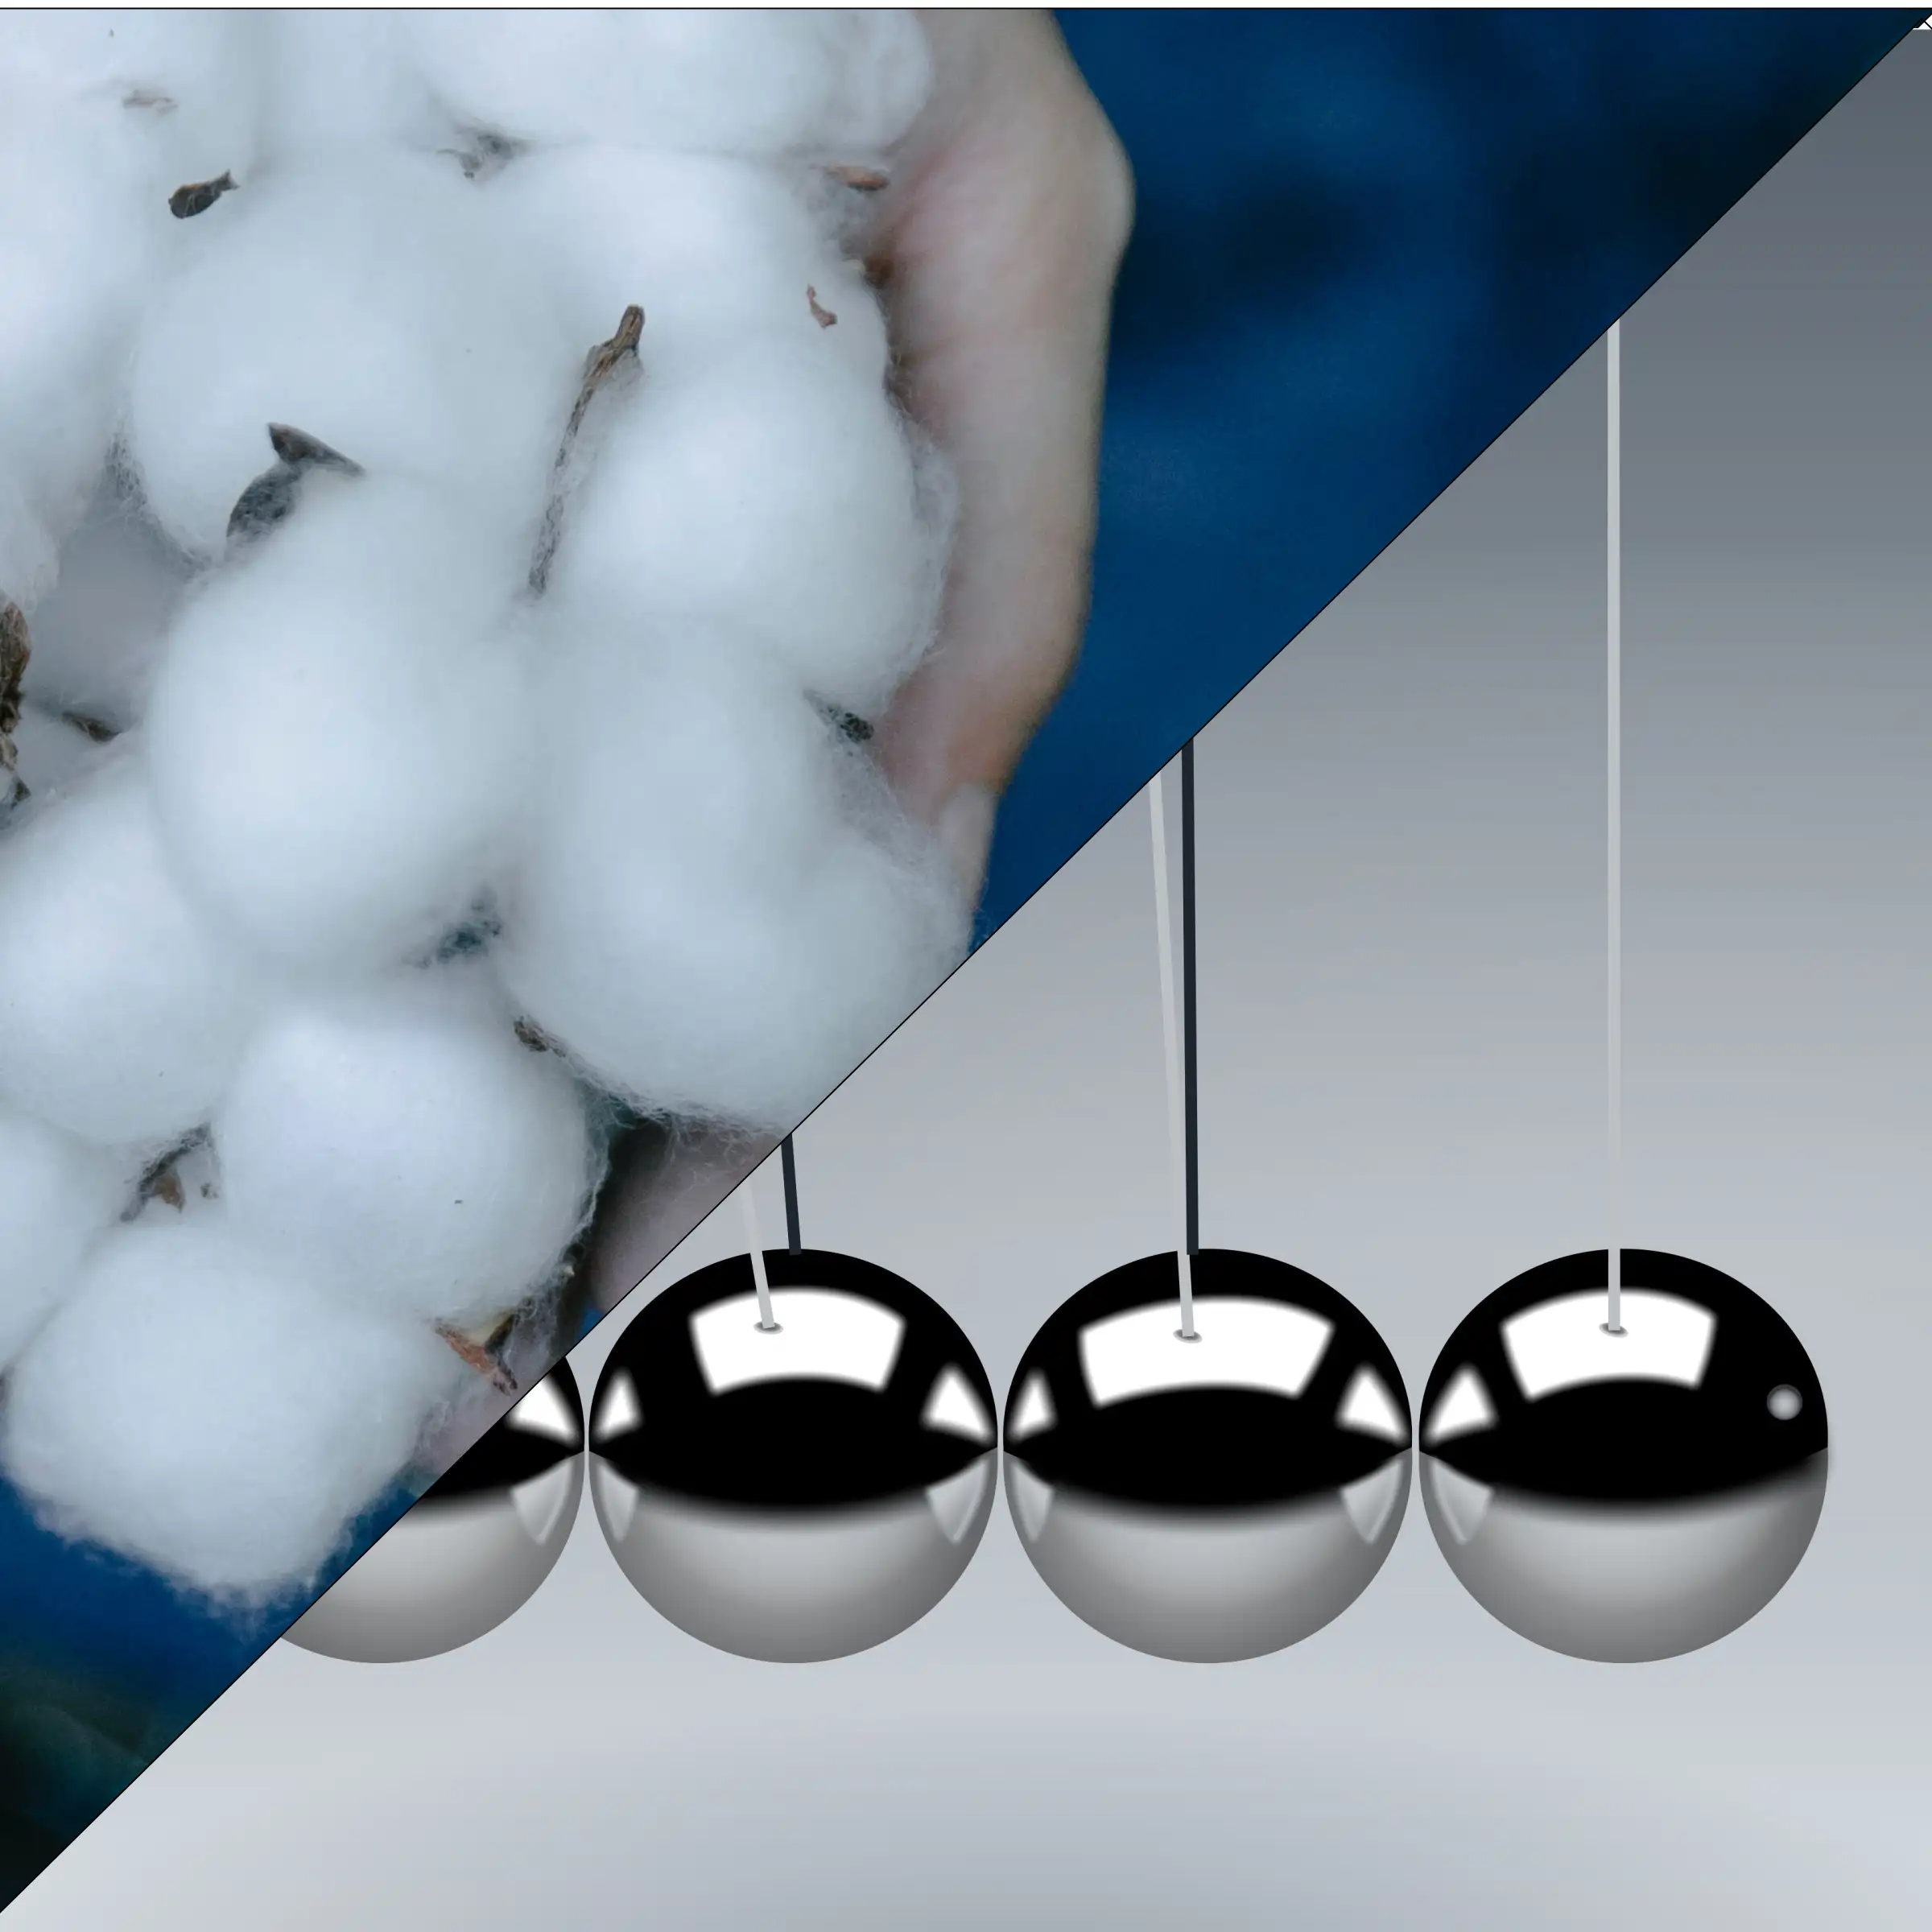 symbol image for Soft Commodities vs Hard Commodities showing a hand full of cotton and metal balls next to each other